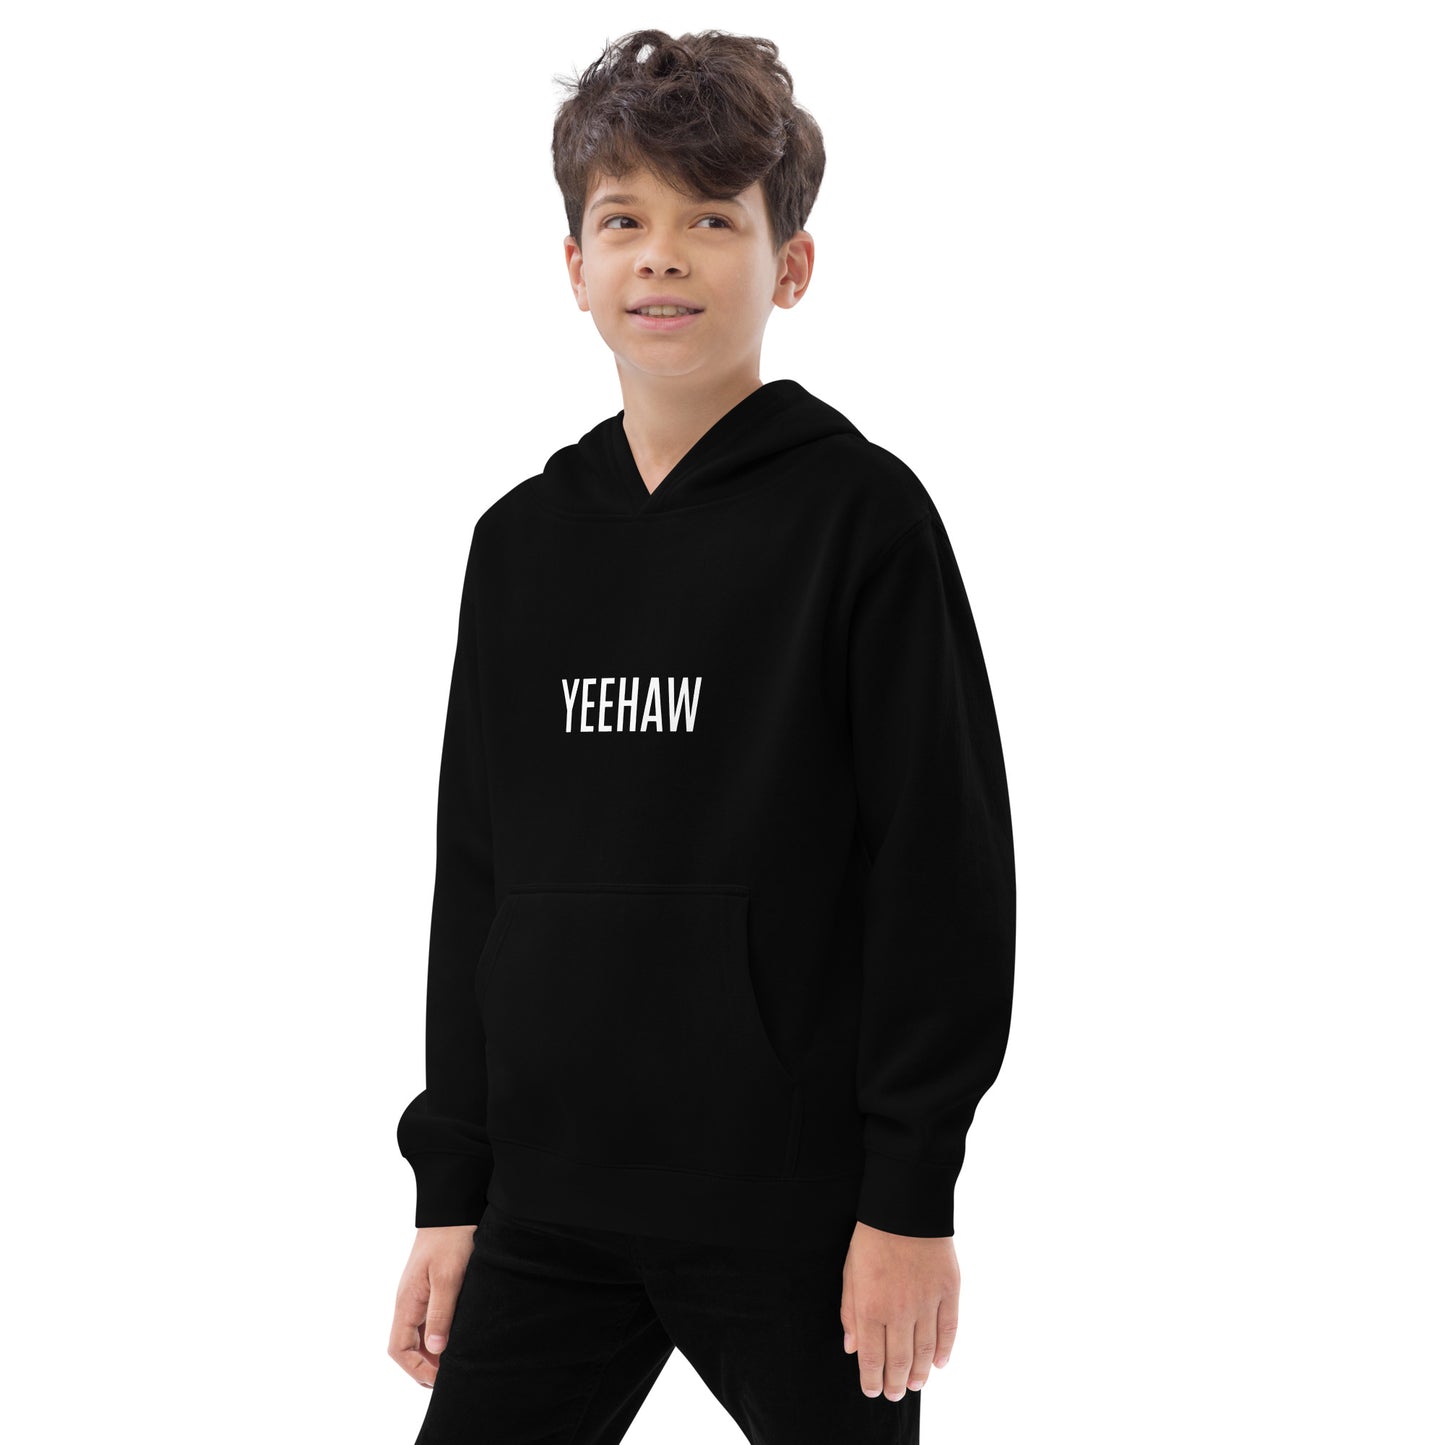 Children's Fleece Hoodie "YEEHAW" in Classic White on Basic Black or French Navy